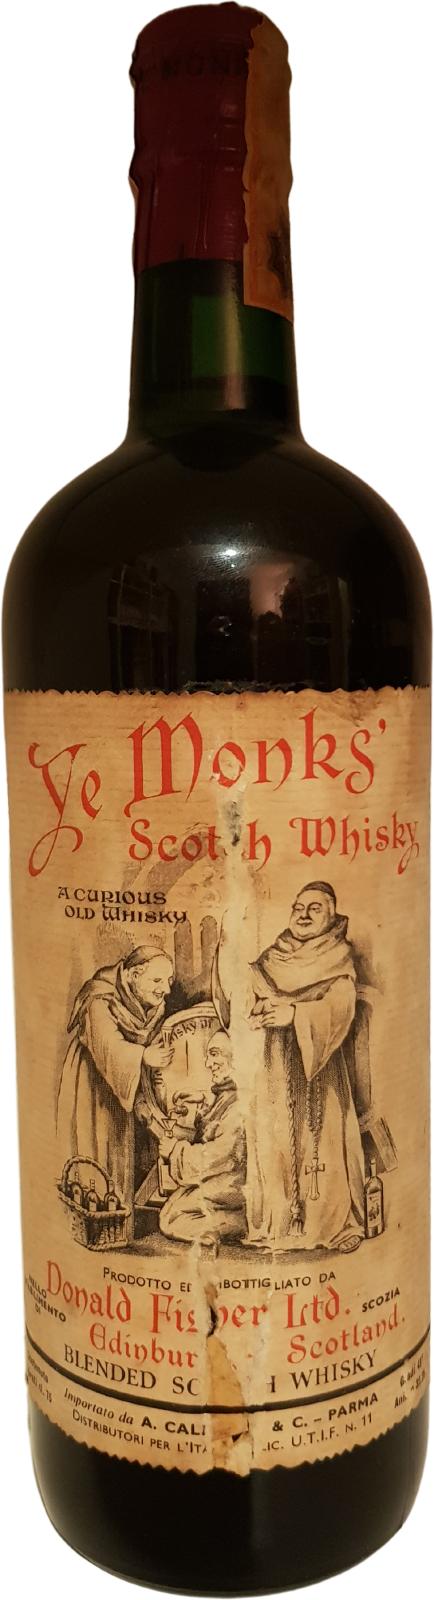 Ye Monks A Curious Old Whisky 43% 750ml